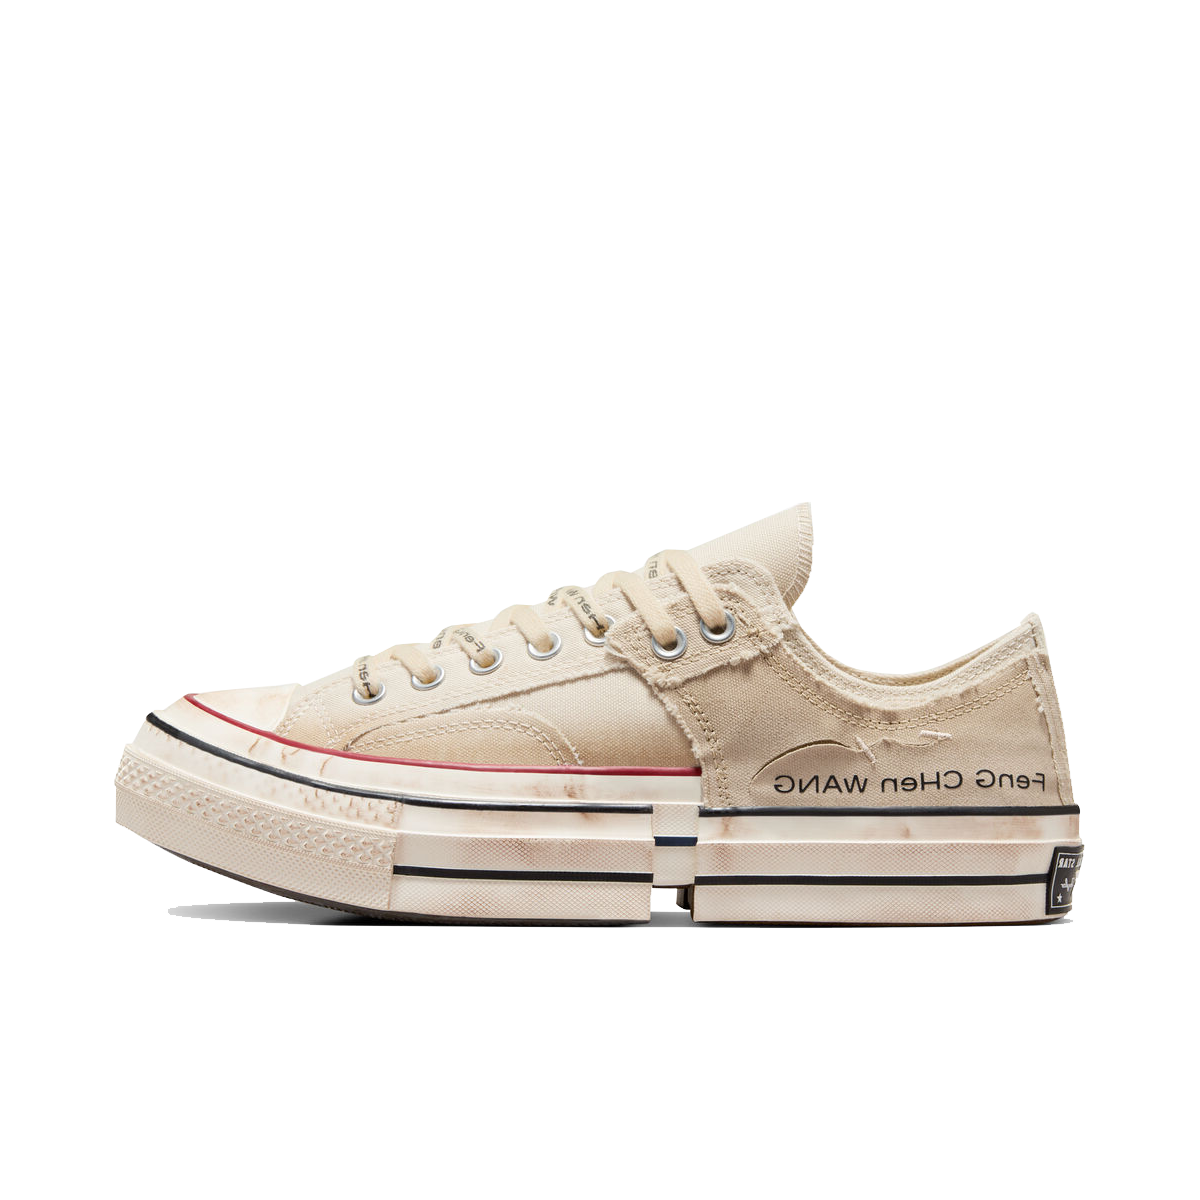 Feng Chen Wang x Converse 2-in-1 Chuck 70 'Natural Ivory' A07718C